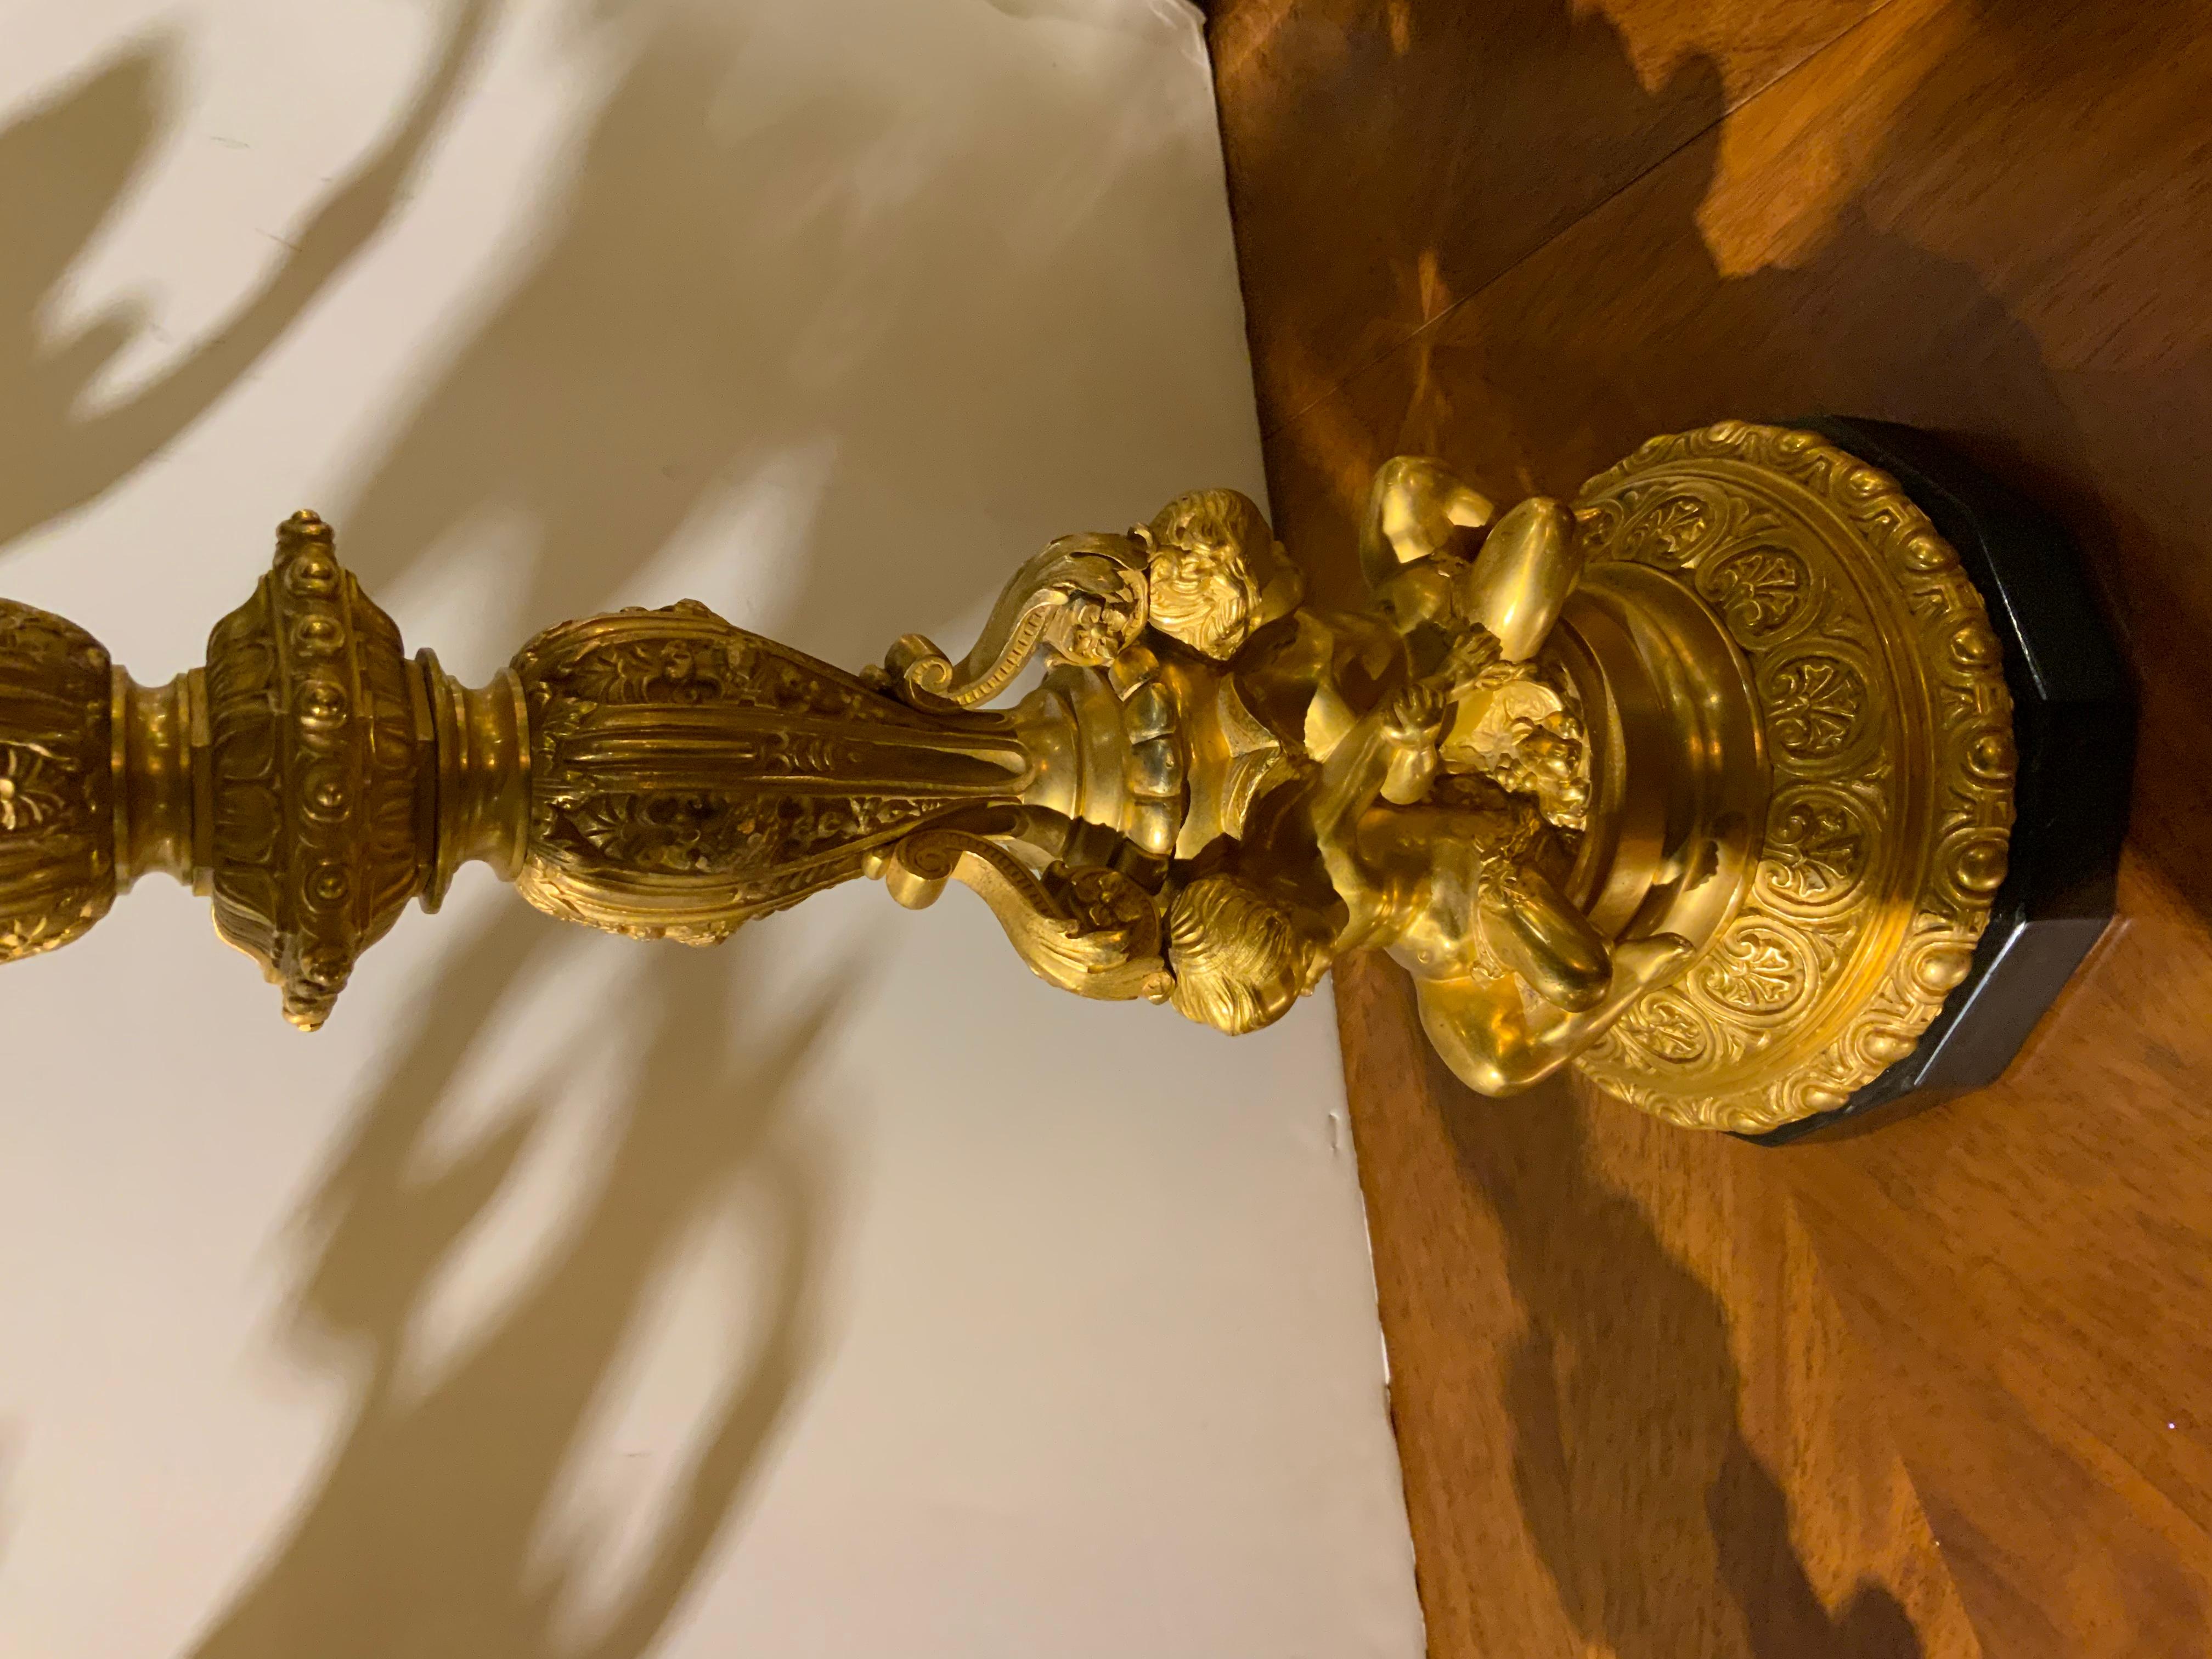 French bronze candleabrum, with foliate scrolling arms, standard with repeated
Pattern in relief, supported by three winged putti, on a twelve sided black slate 
Base.